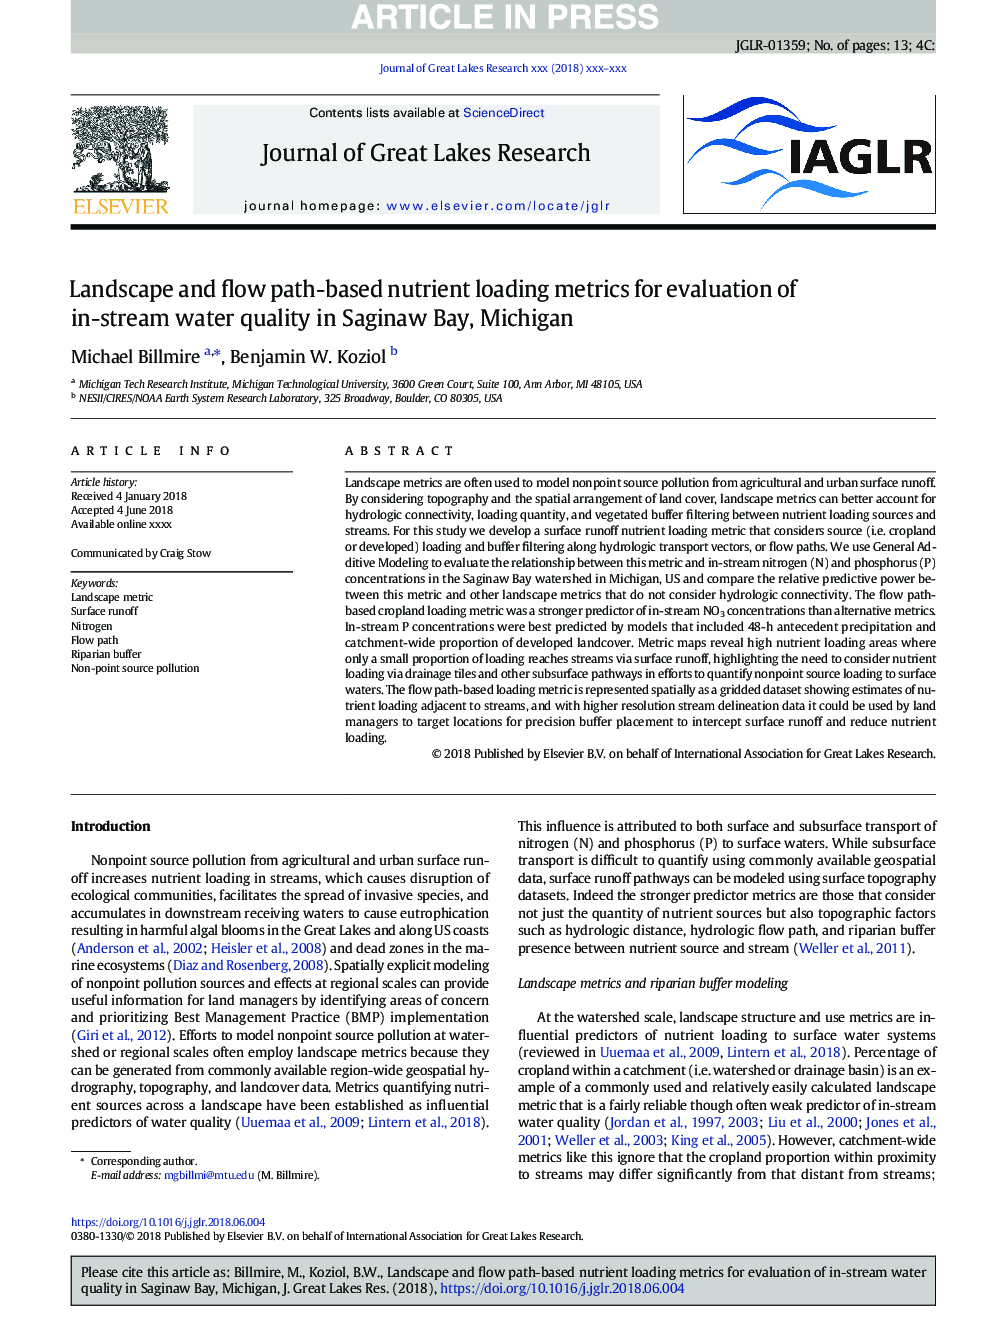 Landscape and flow path-based nutrient loading metrics for evaluation of in-stream water quality in Saginaw Bay, Michigan